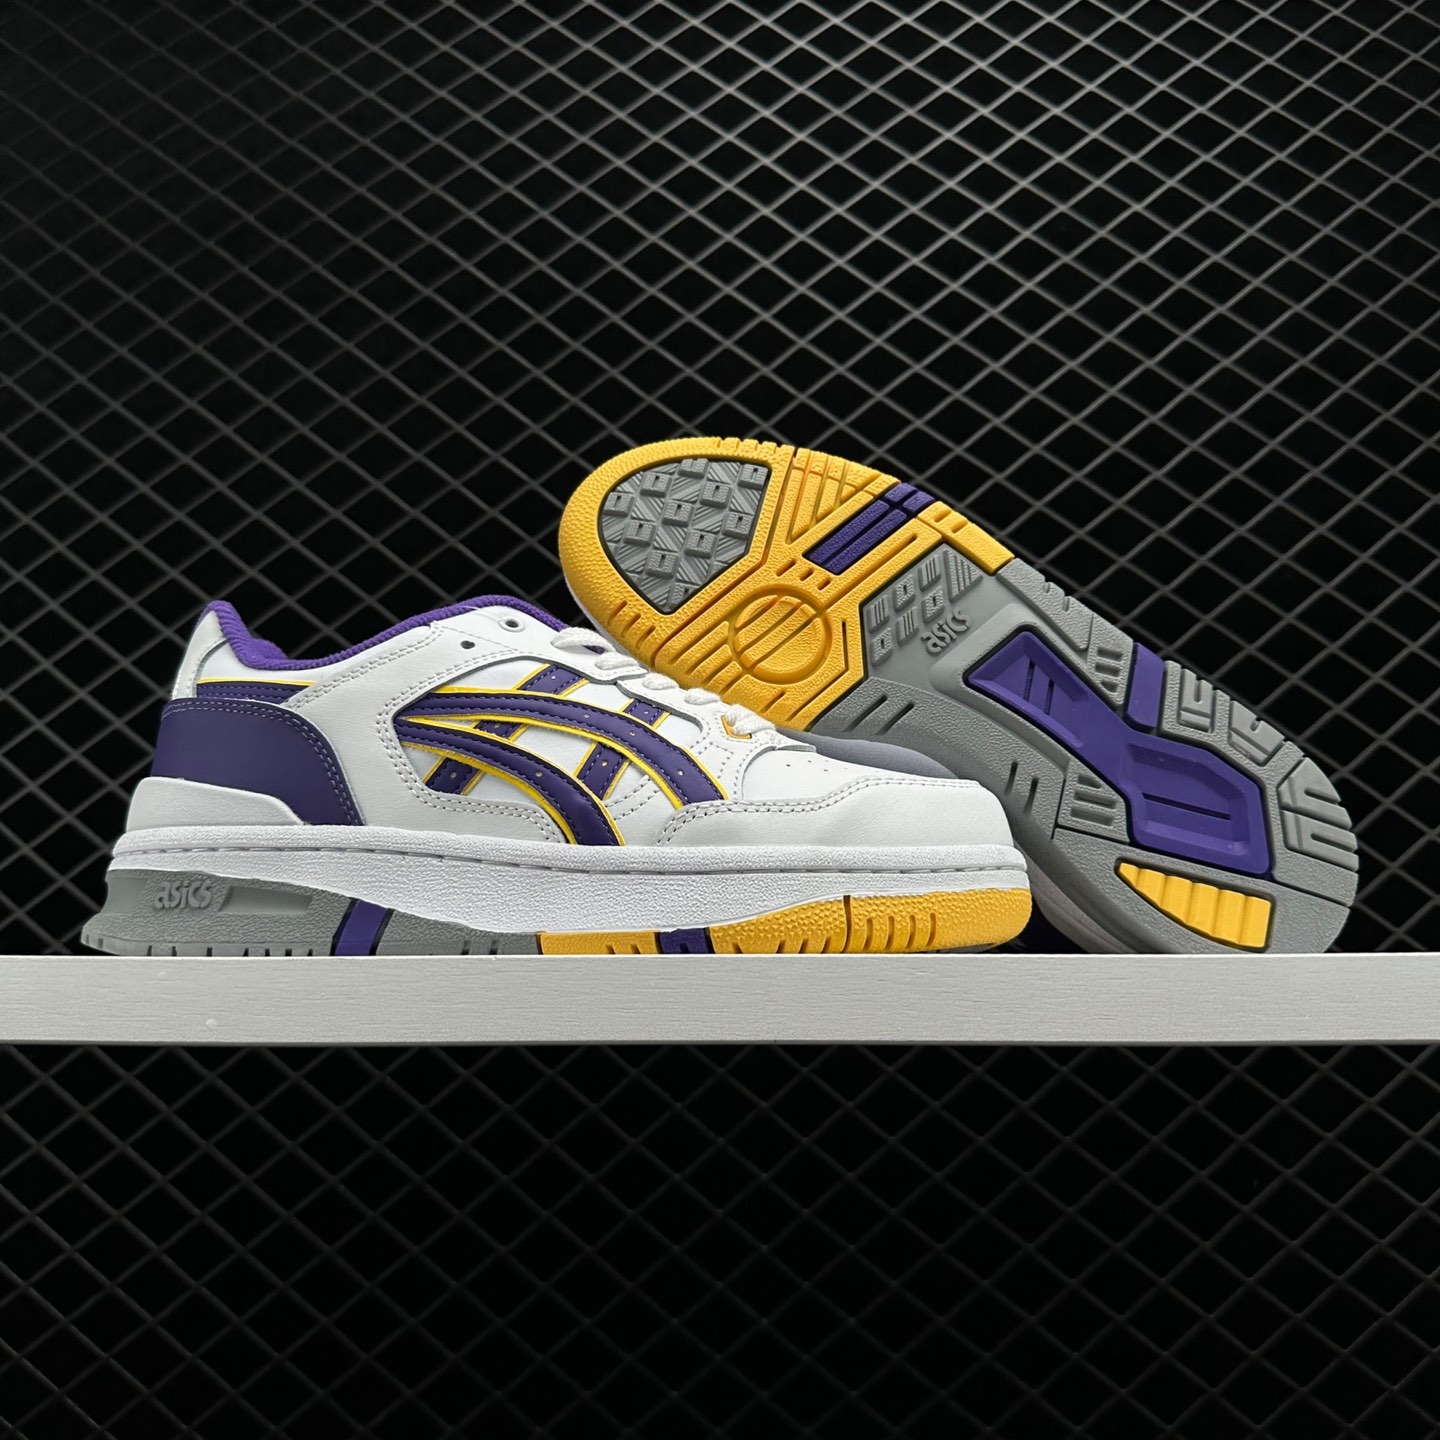 Asics EX89 Lakers 1201A476-102 | Shop Lakers-themed Sneakers